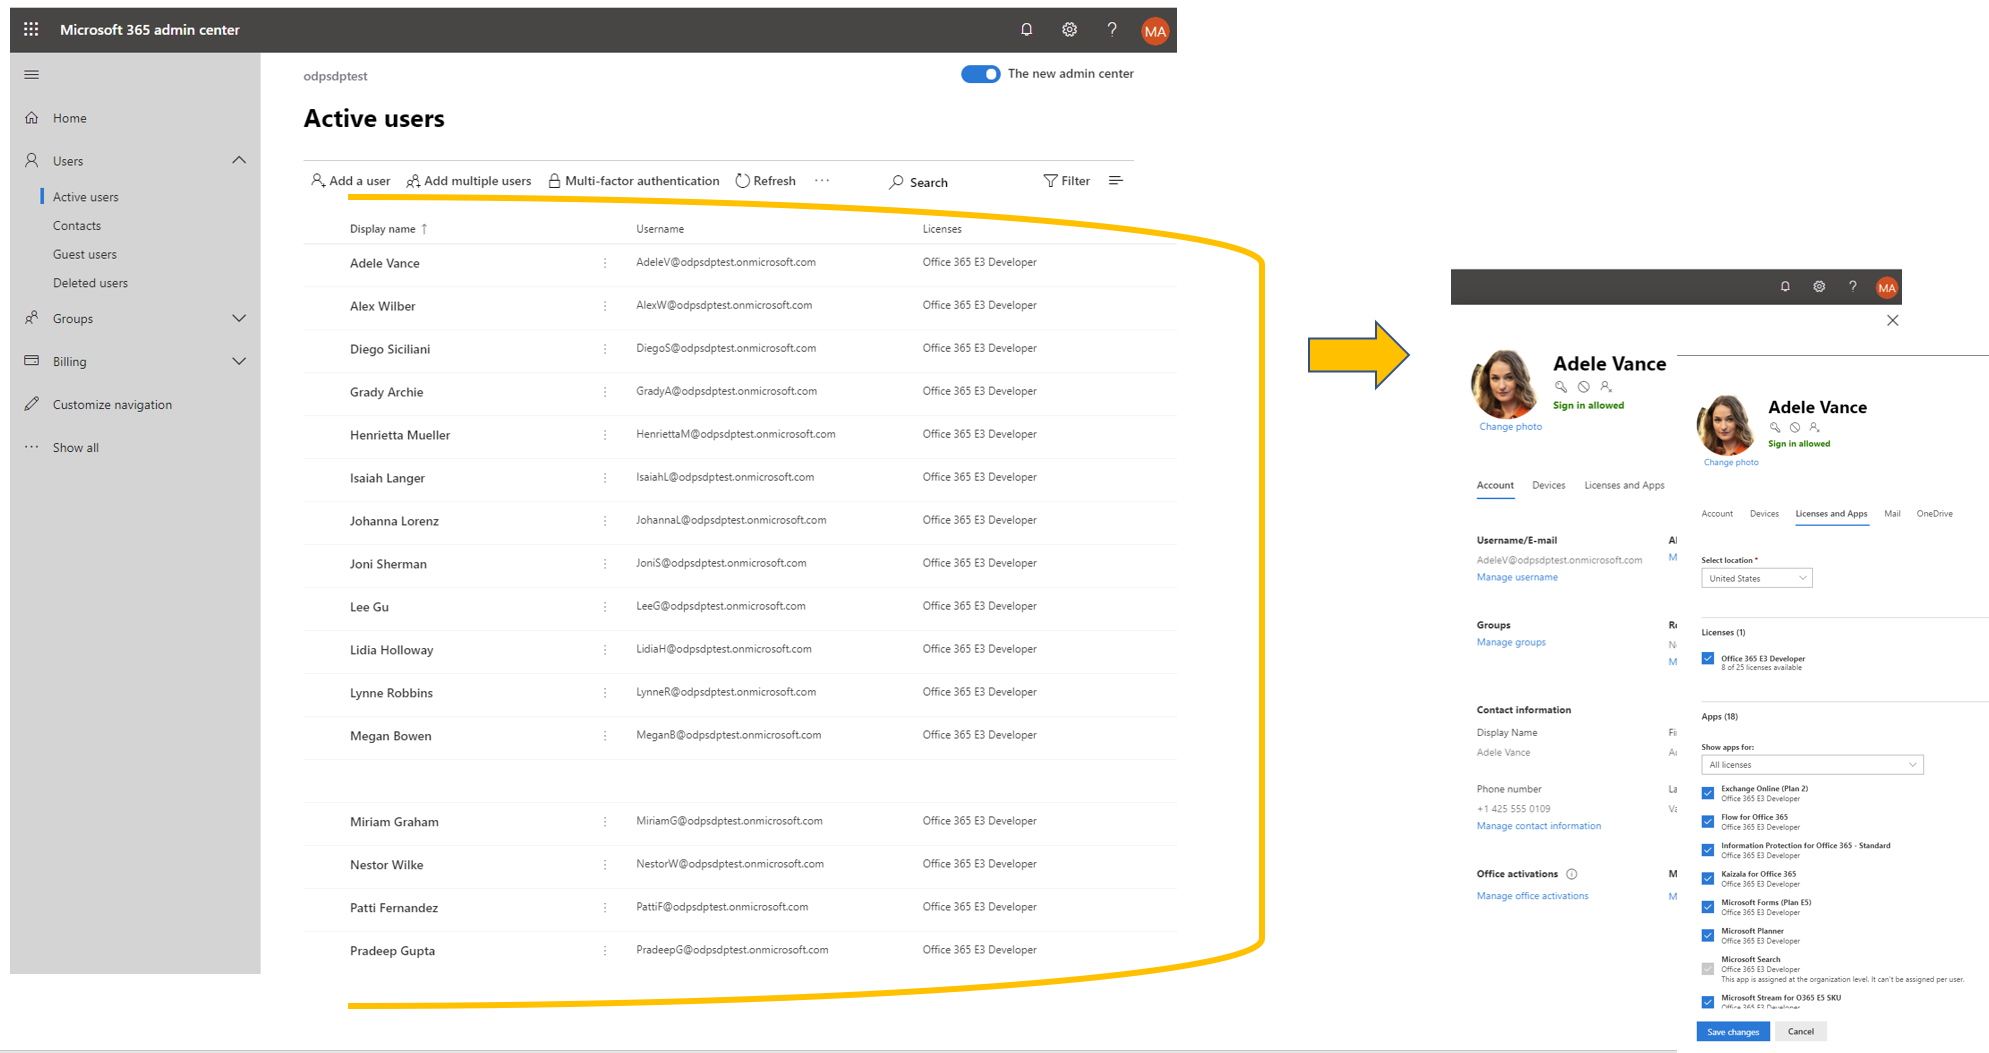 Screenshot of 16 users in the Microsoft 365 Admin Center, with metadata for a selected user